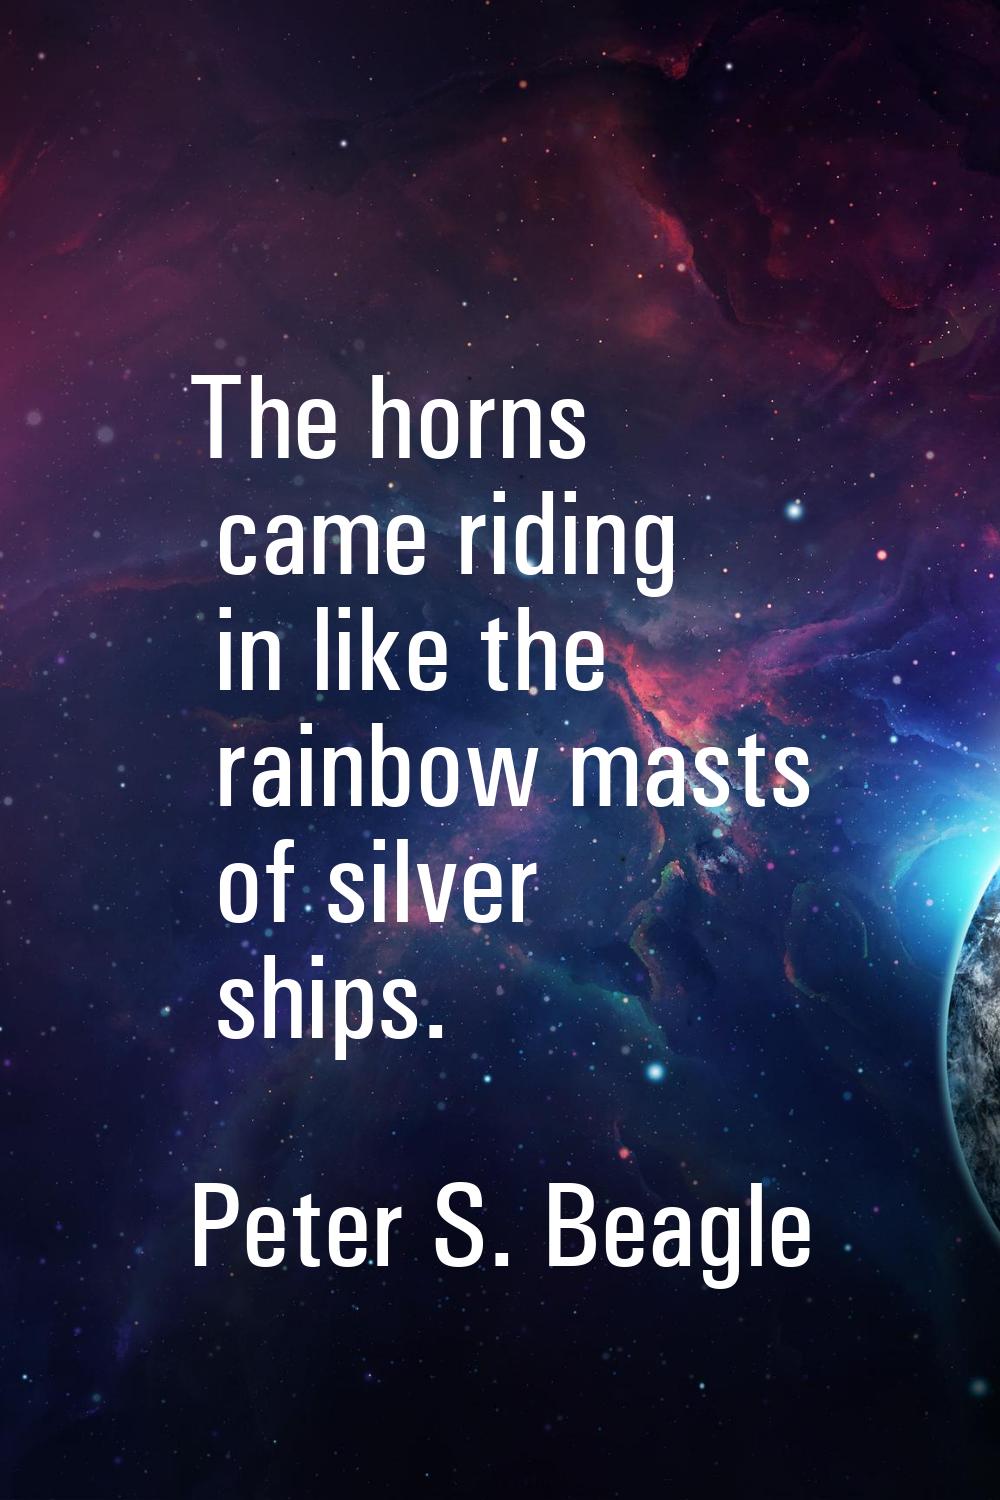 The horns came riding in like the rainbow masts of silver ships.